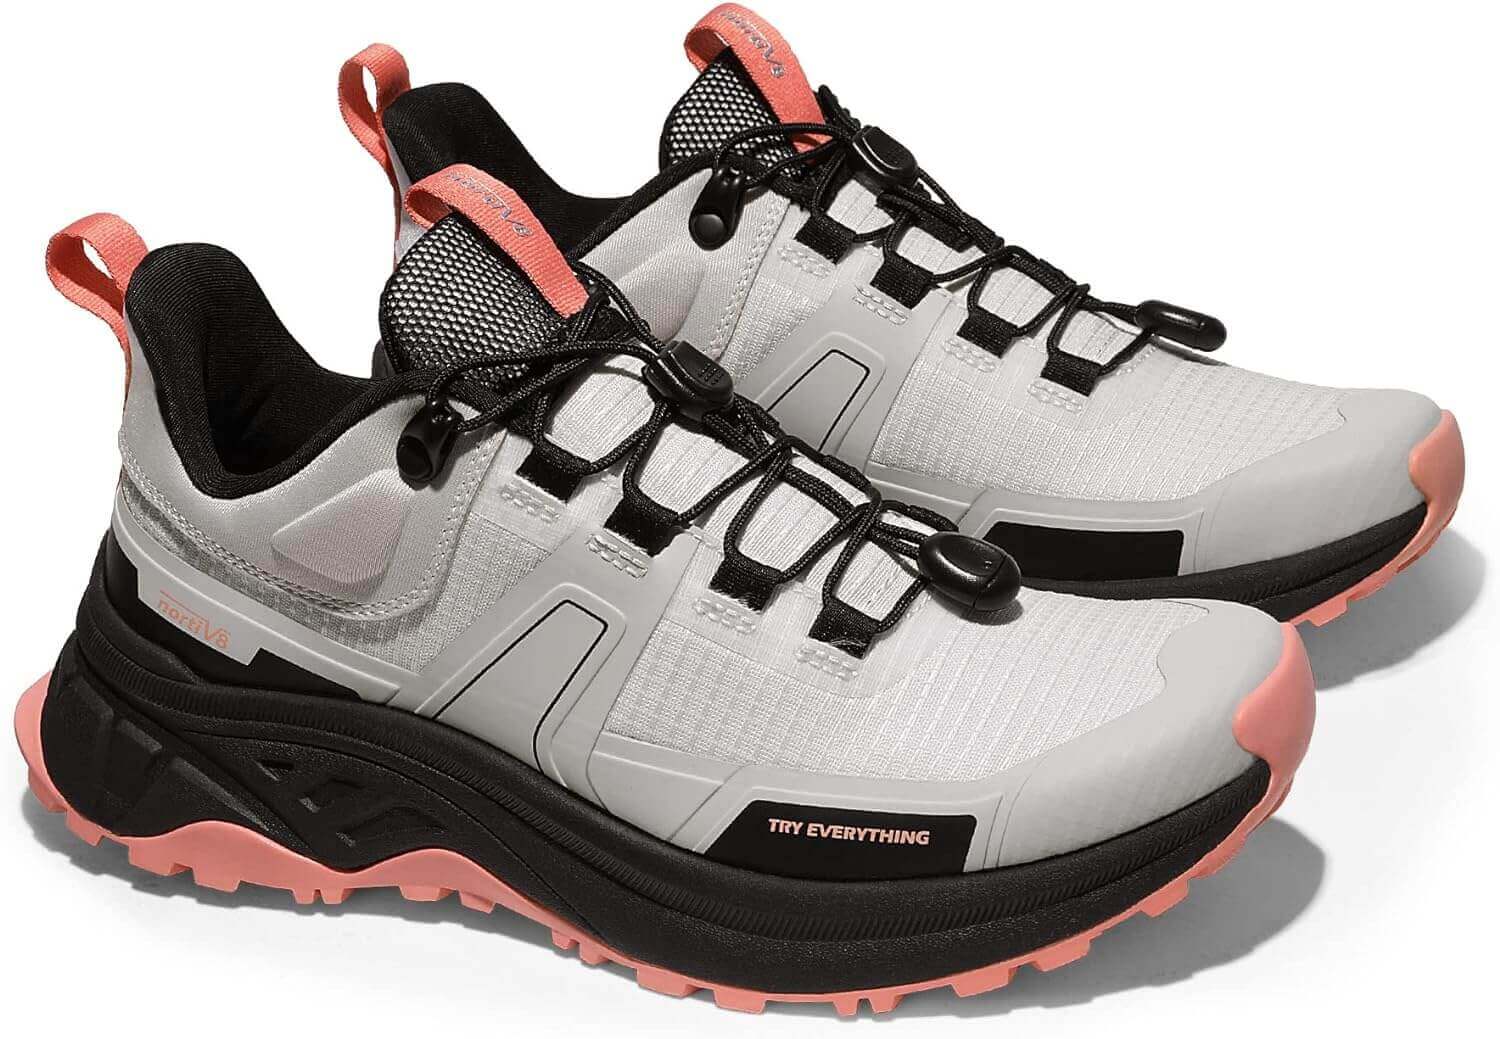 Shop The Latest >NORTIV 8 Women's Lightweight Hiking Shoes > *Only $72.79*> From The Top Brand > *NORTIV 8l* > Shop Now and Get Free Shipping On Orders Over $45.00 >*Shop Earth Foot*